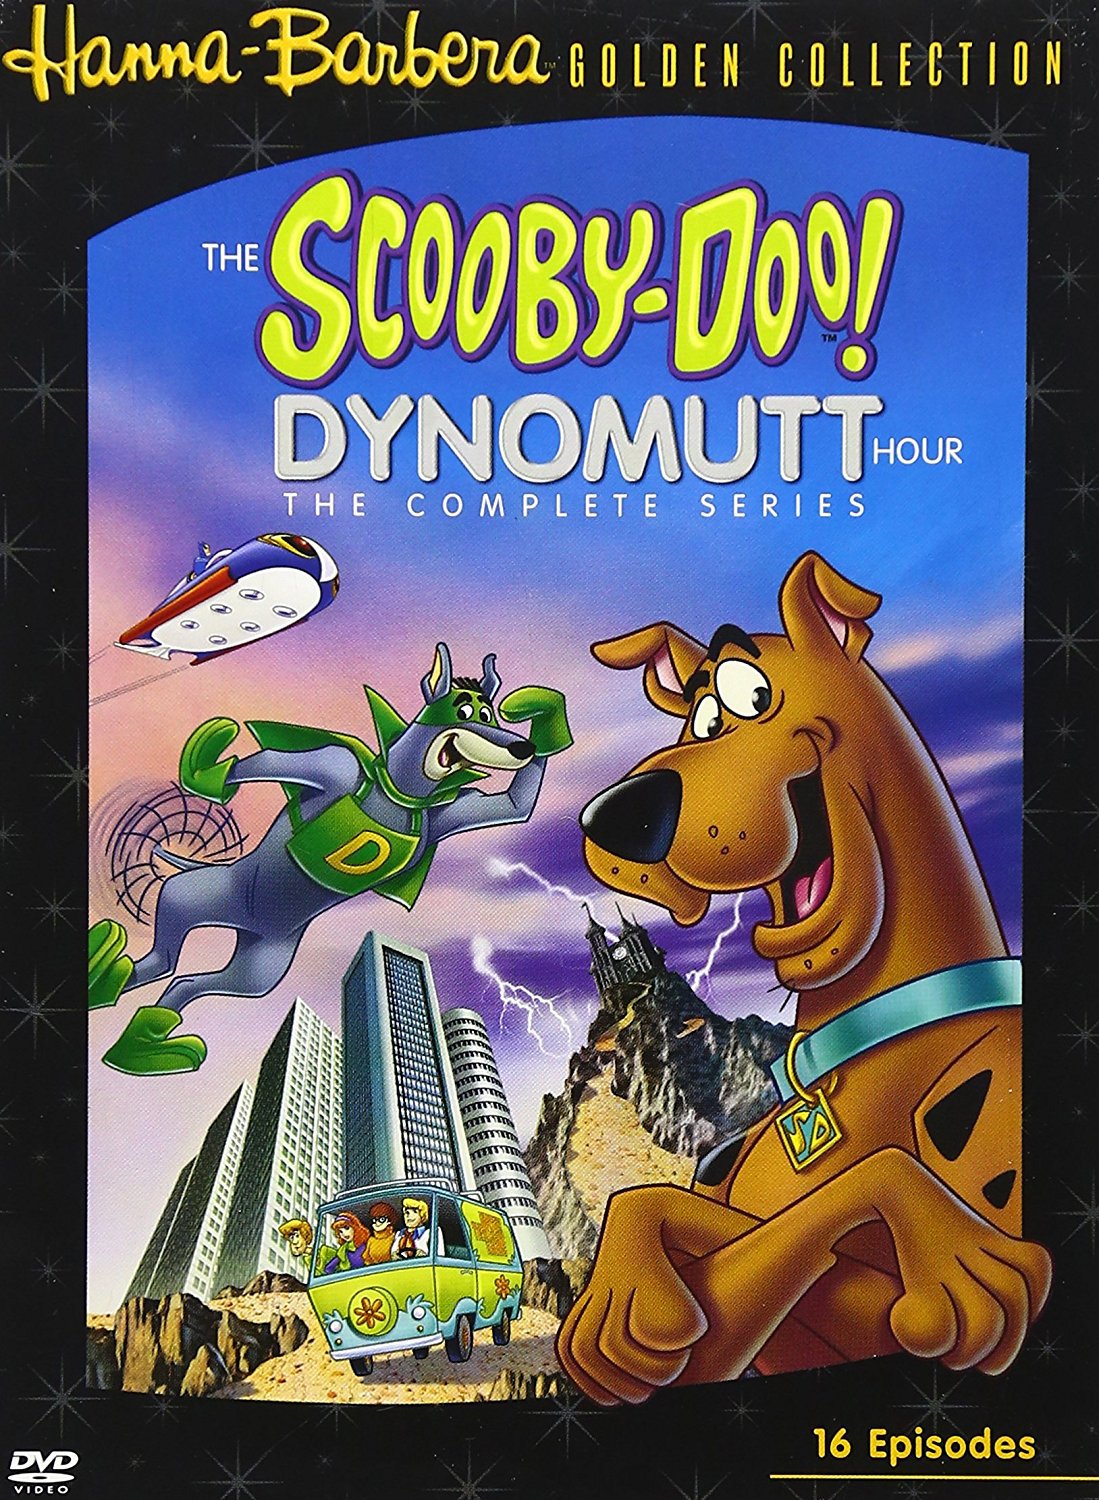 Scooby Doo! The Dynomutt Hour